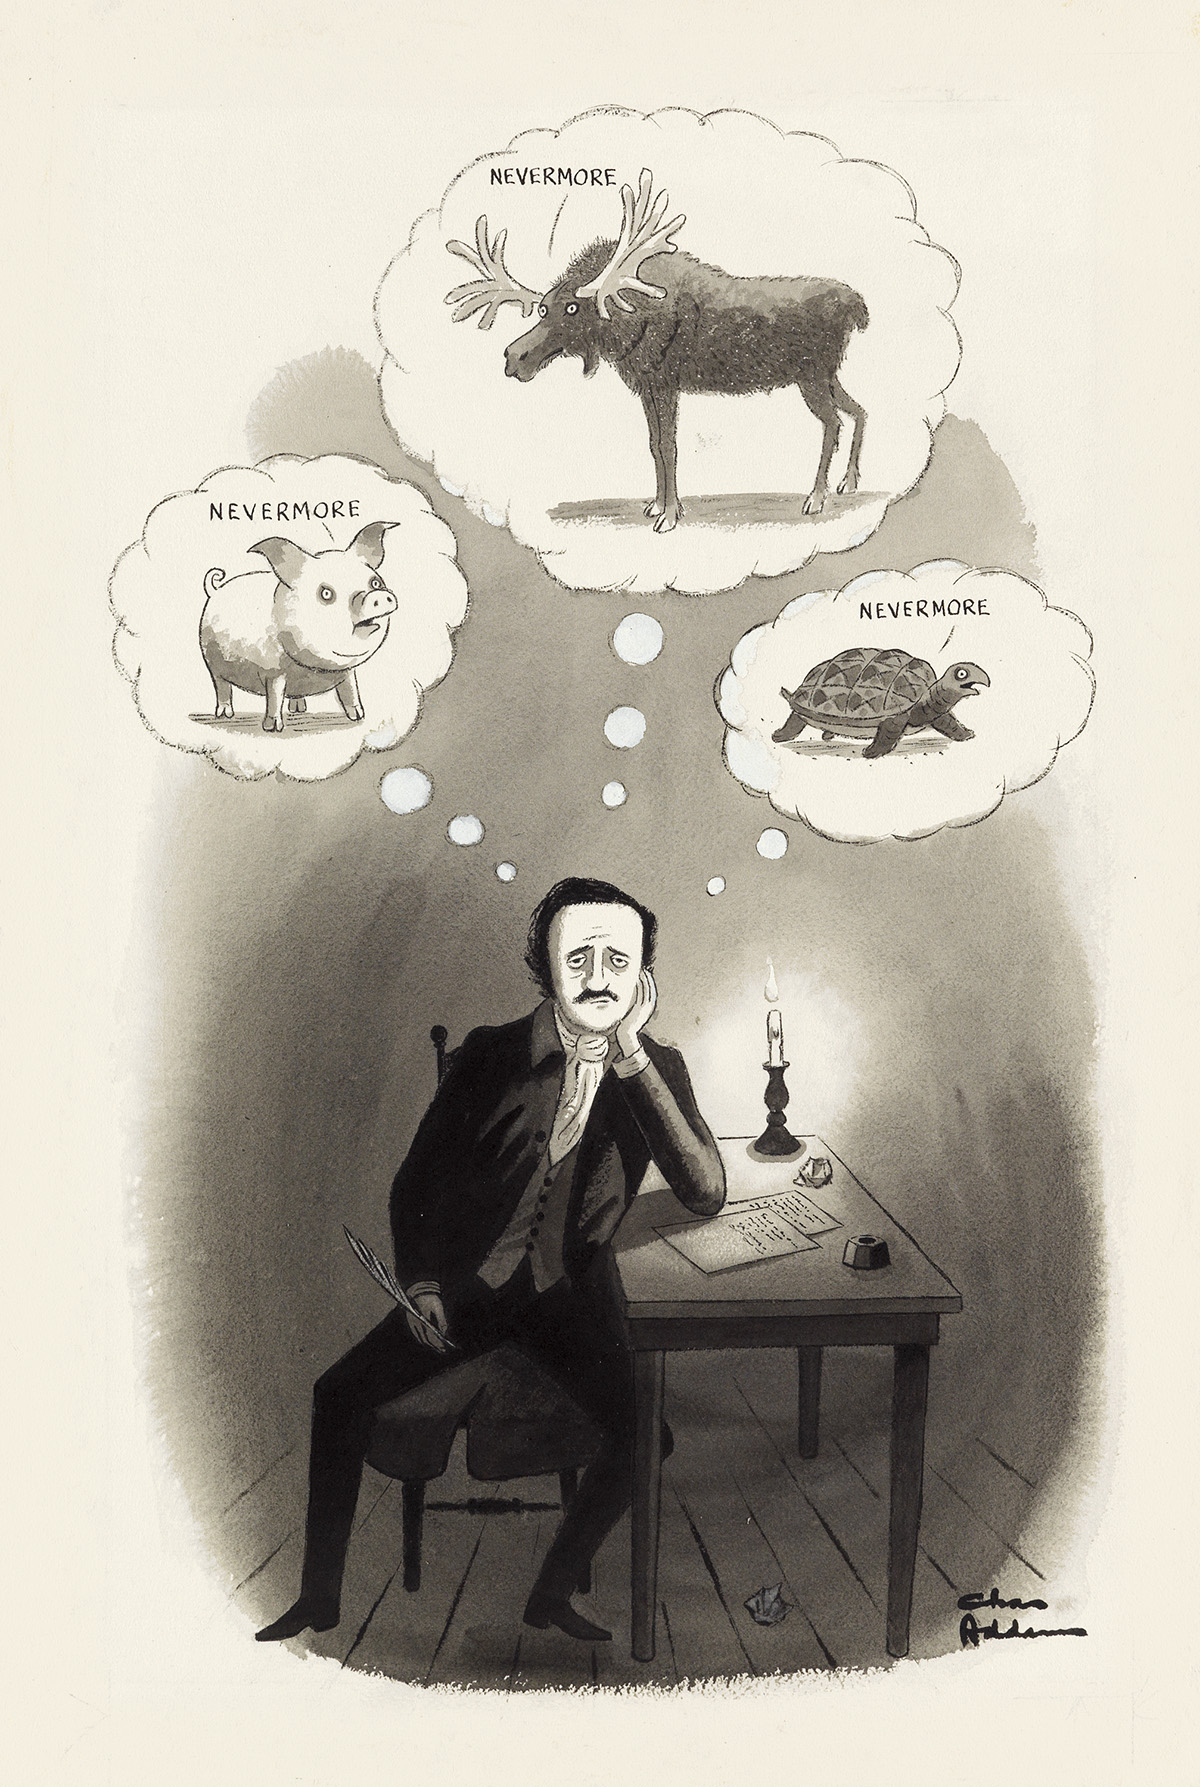 THE NEW YORKER. CHARLES ADDAMS. Nevermore.